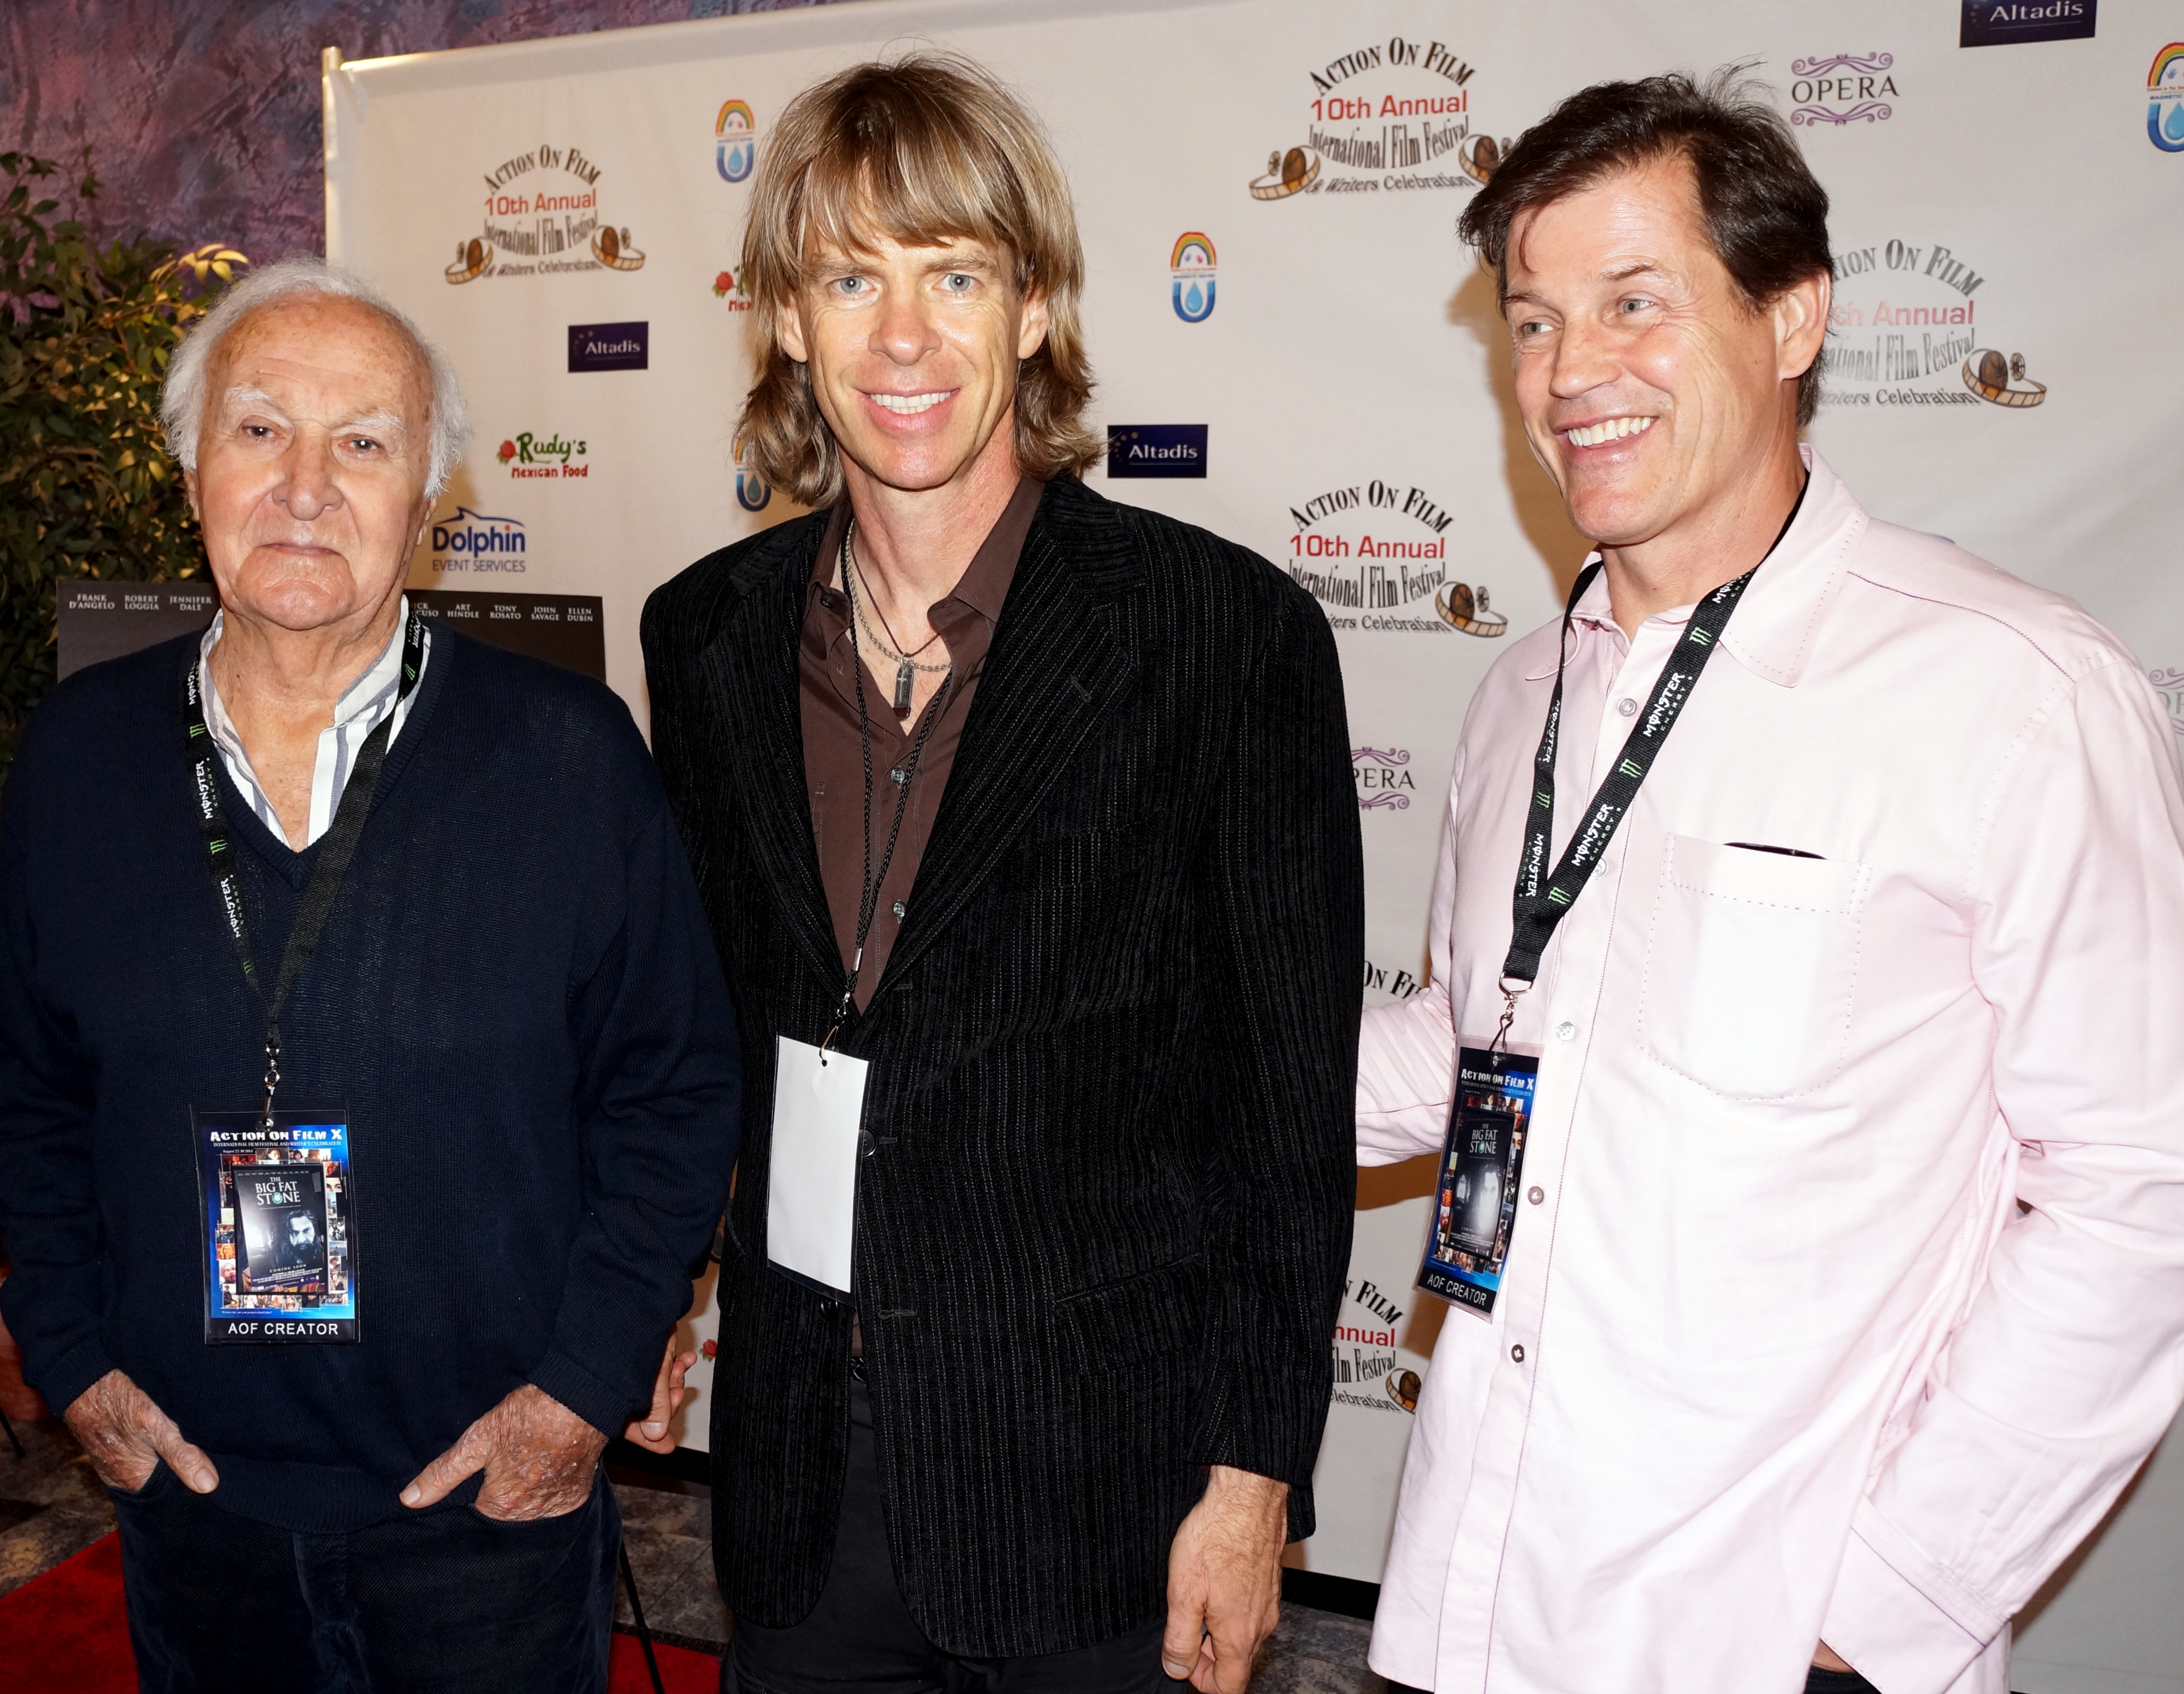 Gregory Graham, Michael Paré, and Robert Loggia at the screening of the feature film Big Fat Stone at the Action on Film International Film Festival on 8/25/14